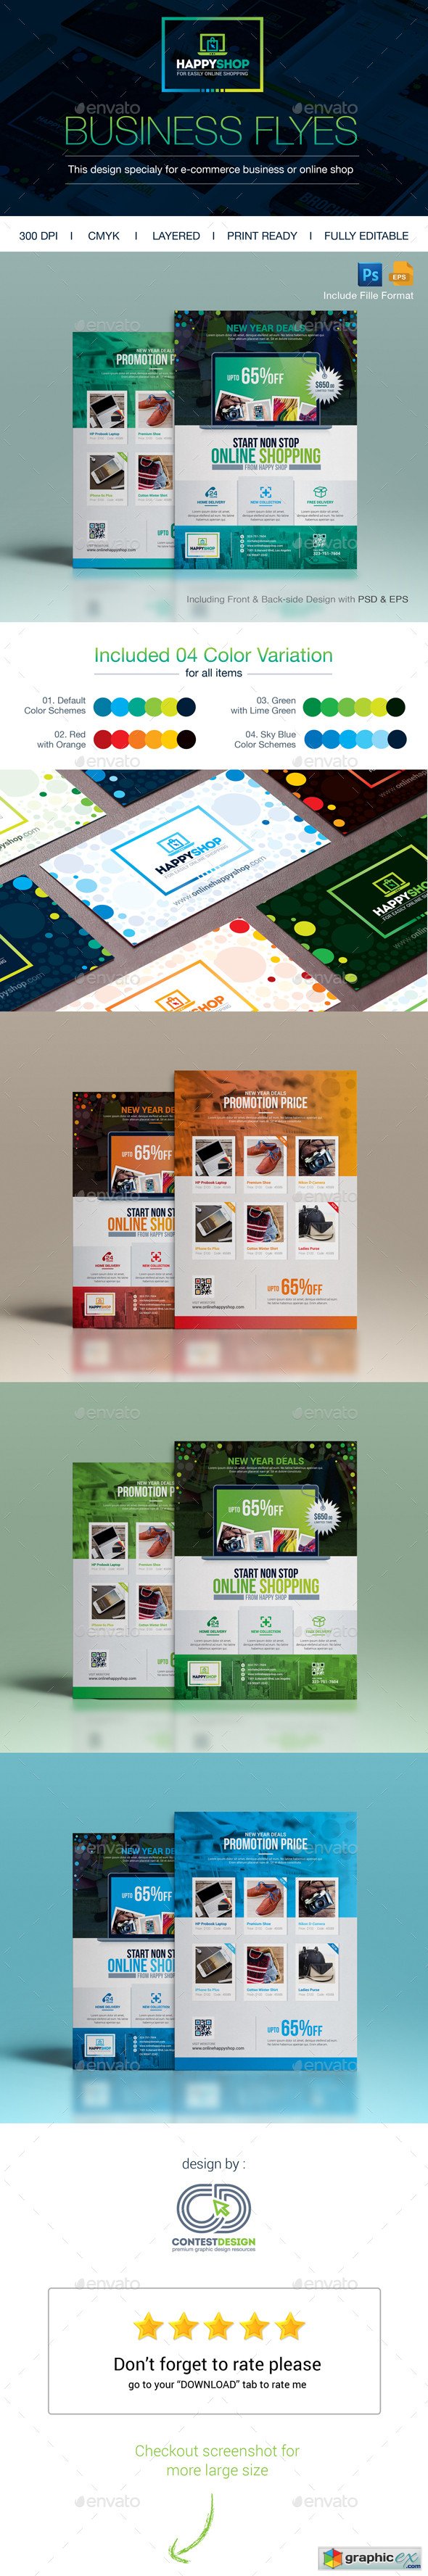 Product Promotional E-Commerce Business Flyers